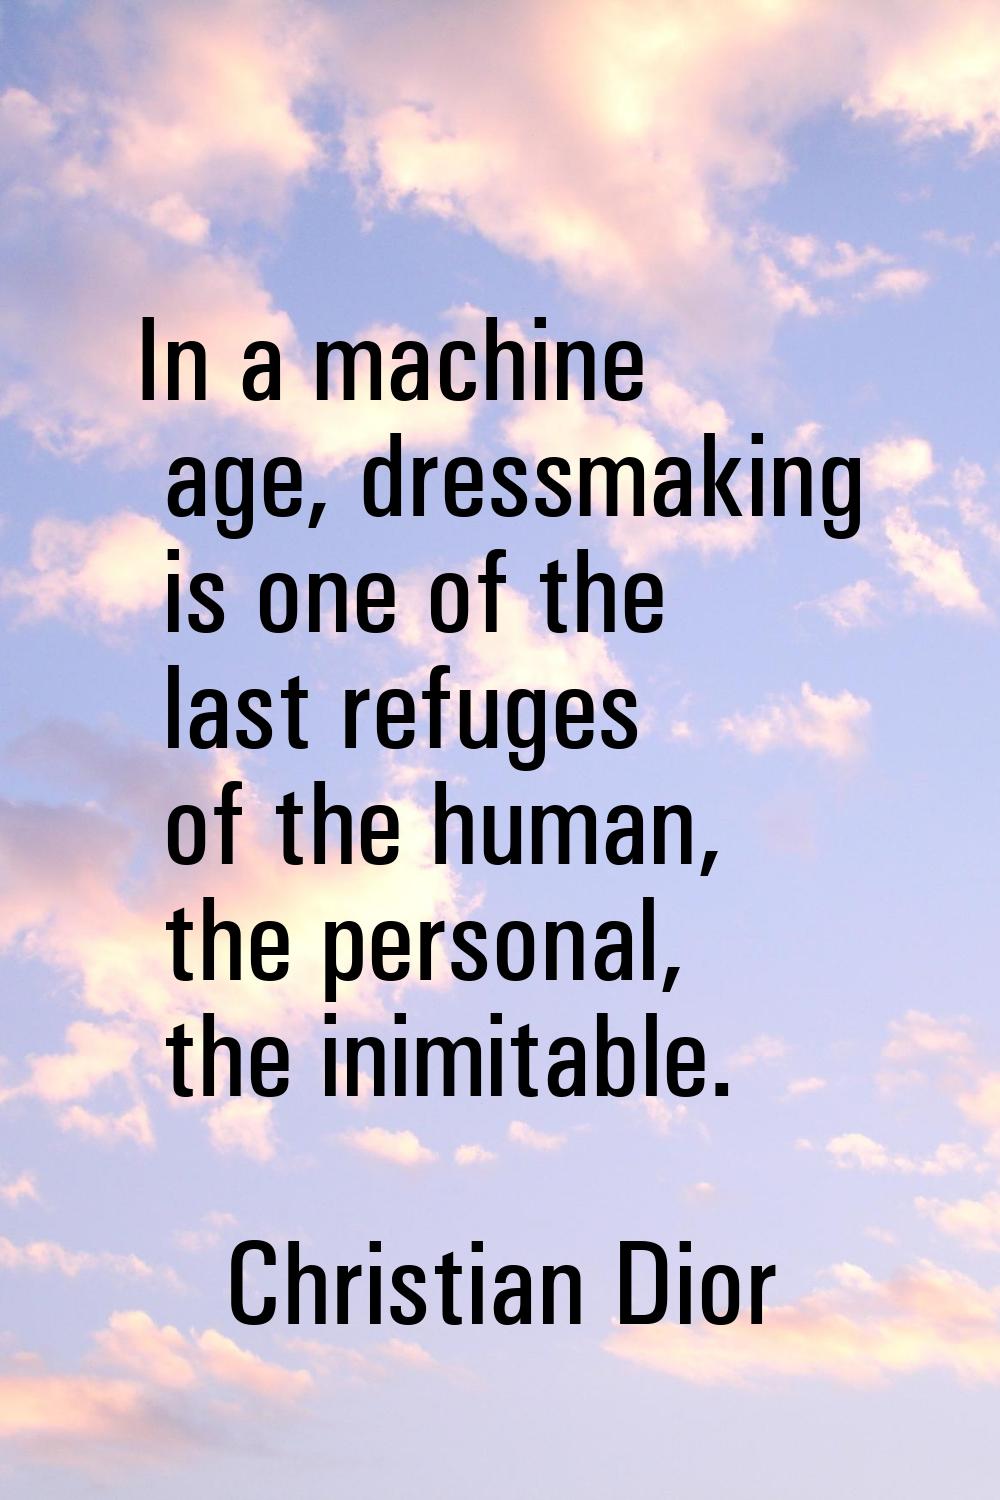 In a machine age, dressmaking is one of the last refuges of the human, the personal, the inimitable